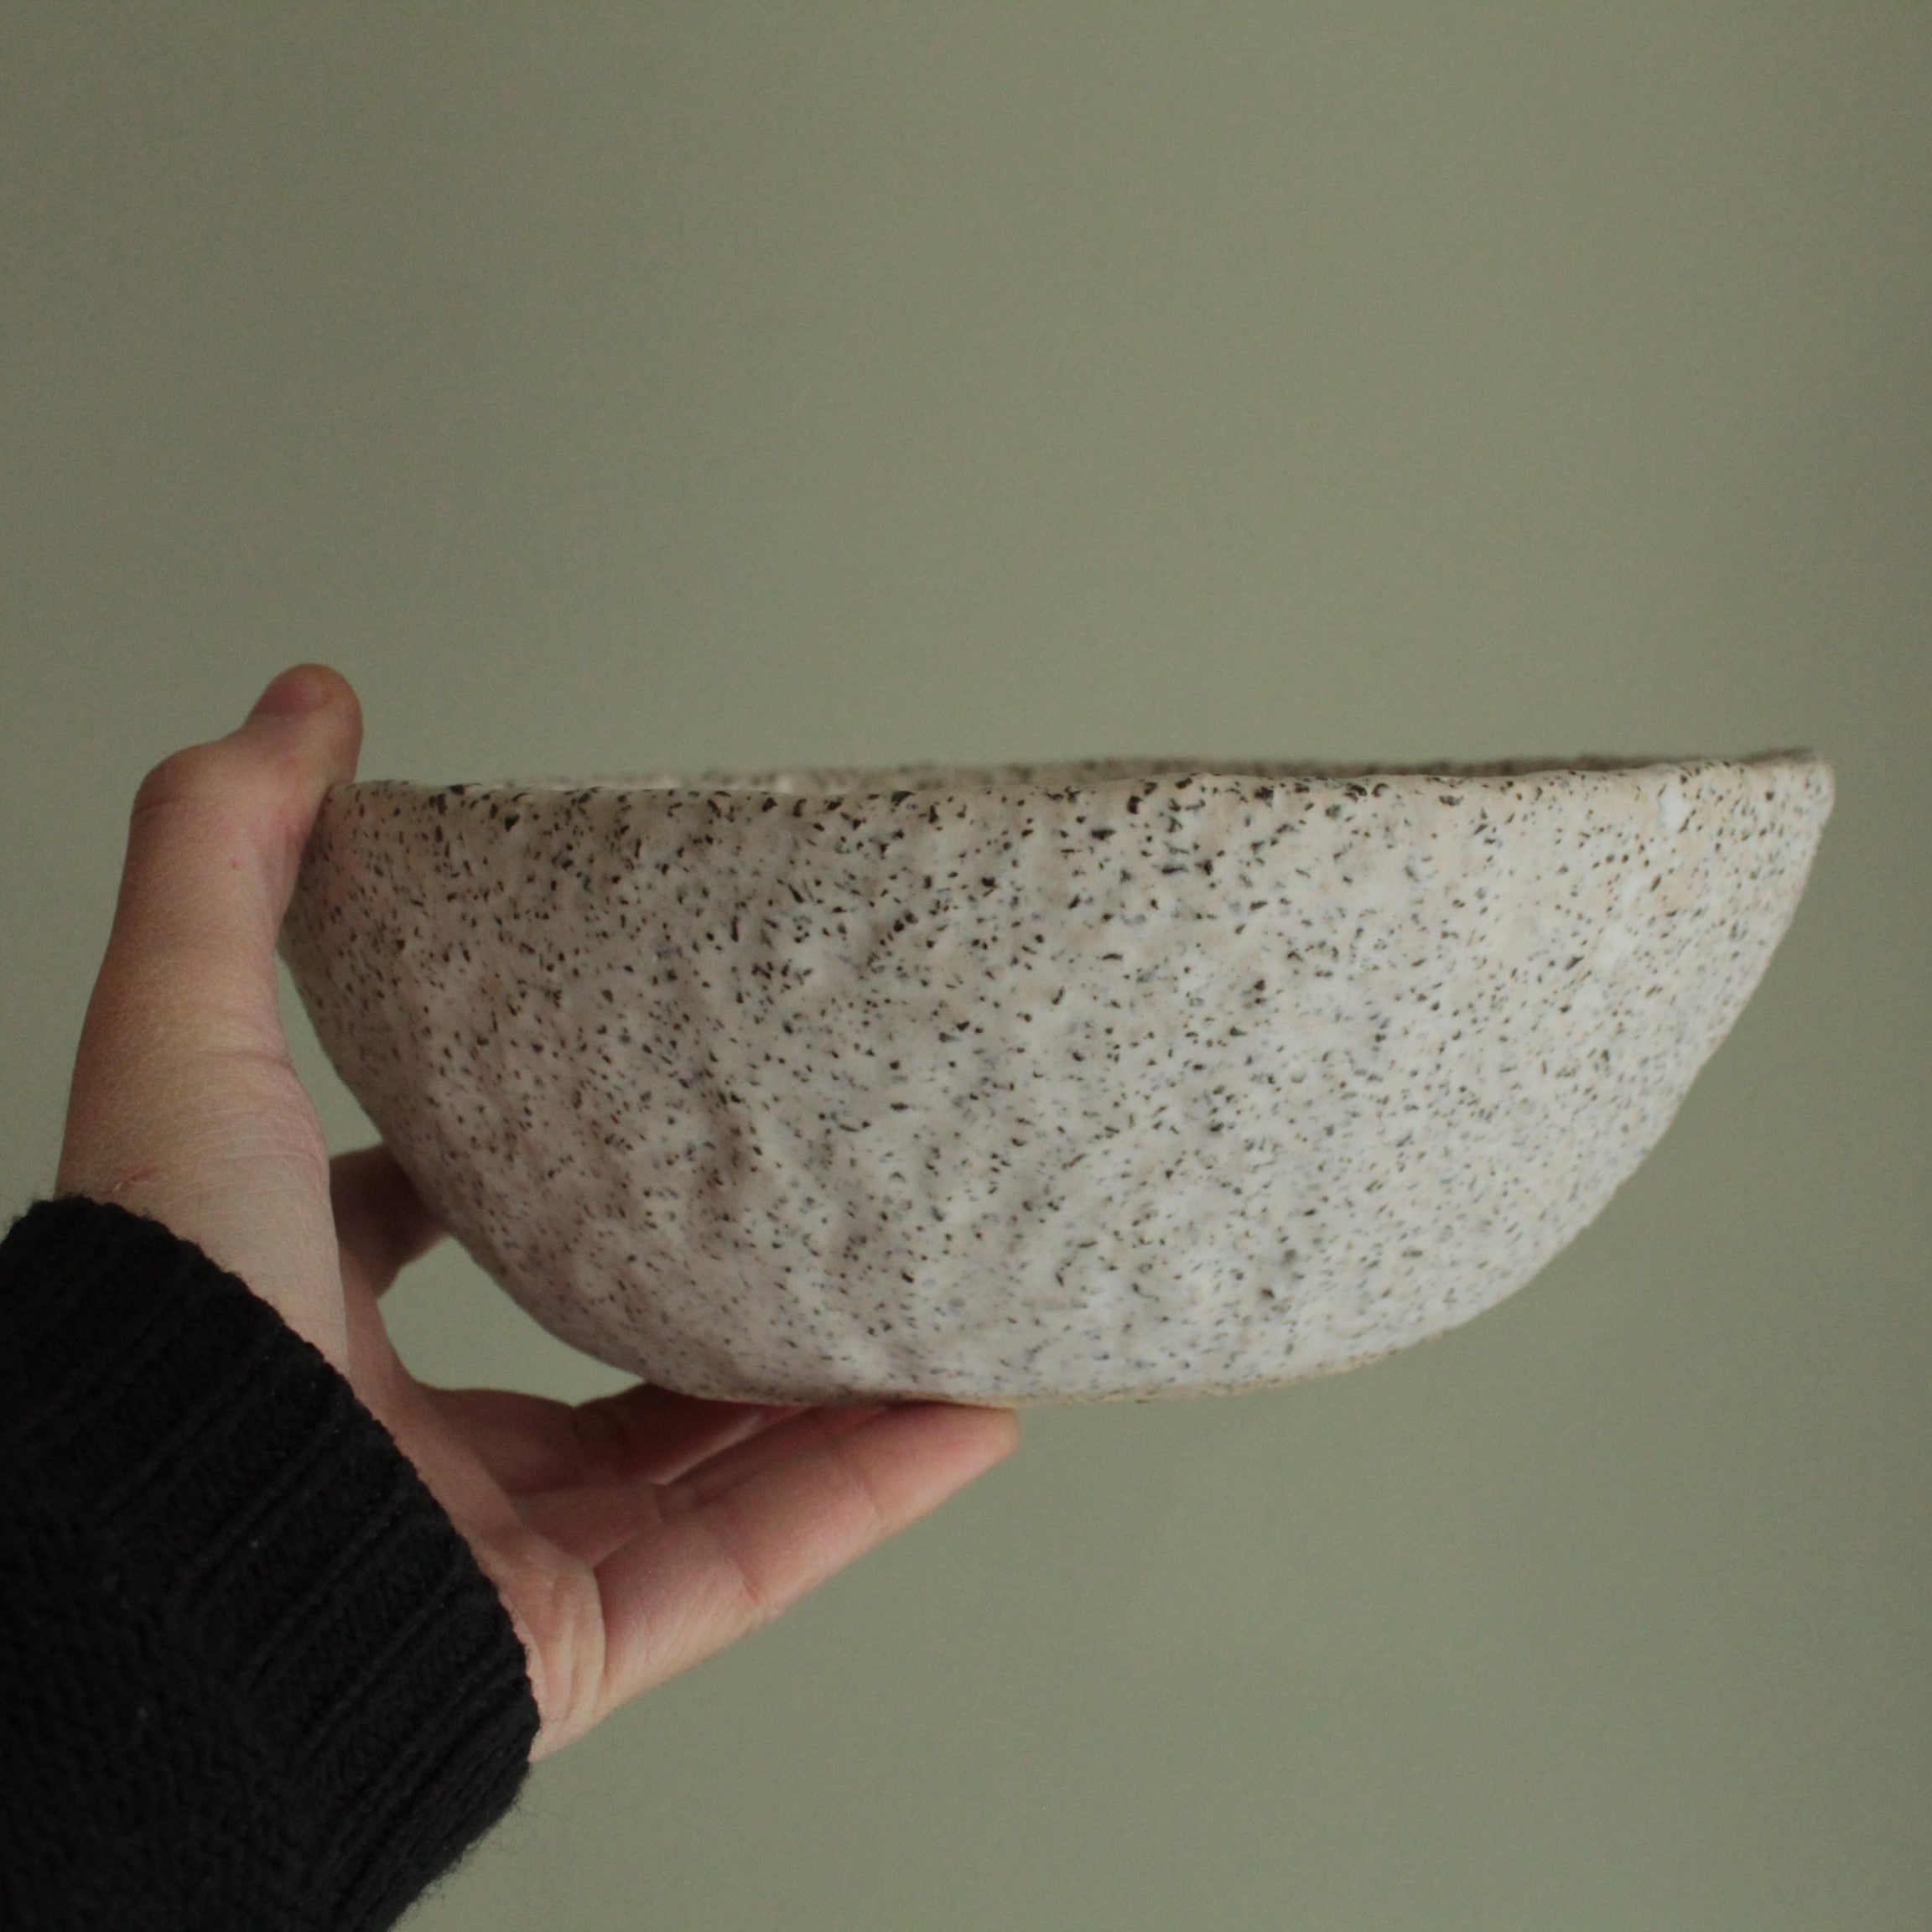 White bowls with rocks